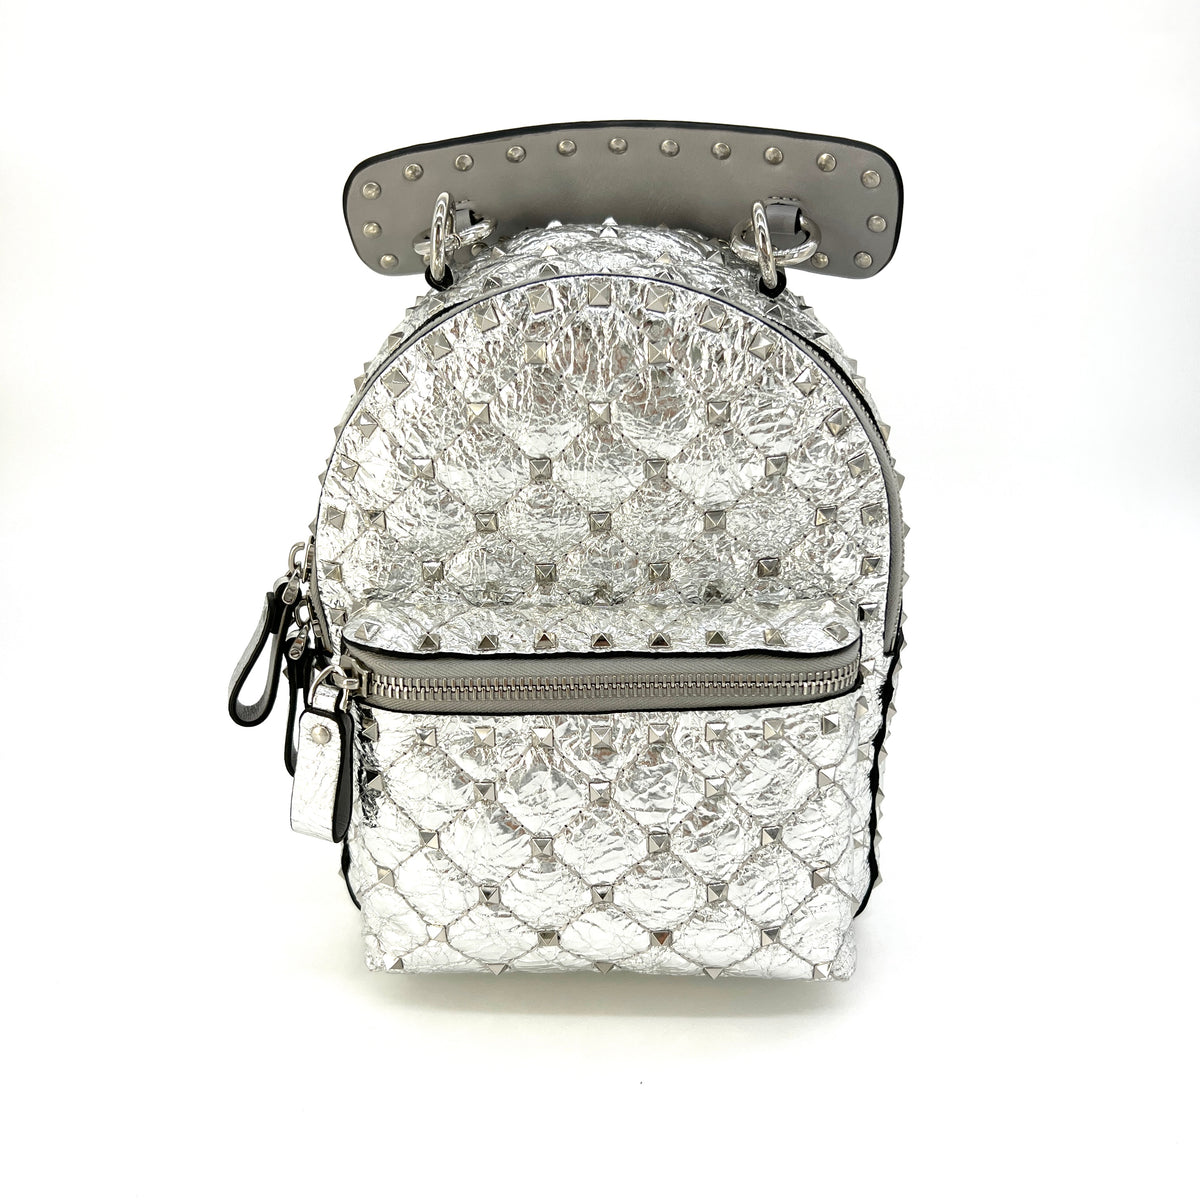 Valentino Metallic Silver Leather Rockstud Spike Mini Backpack Silver [Guaranteed Authentic]